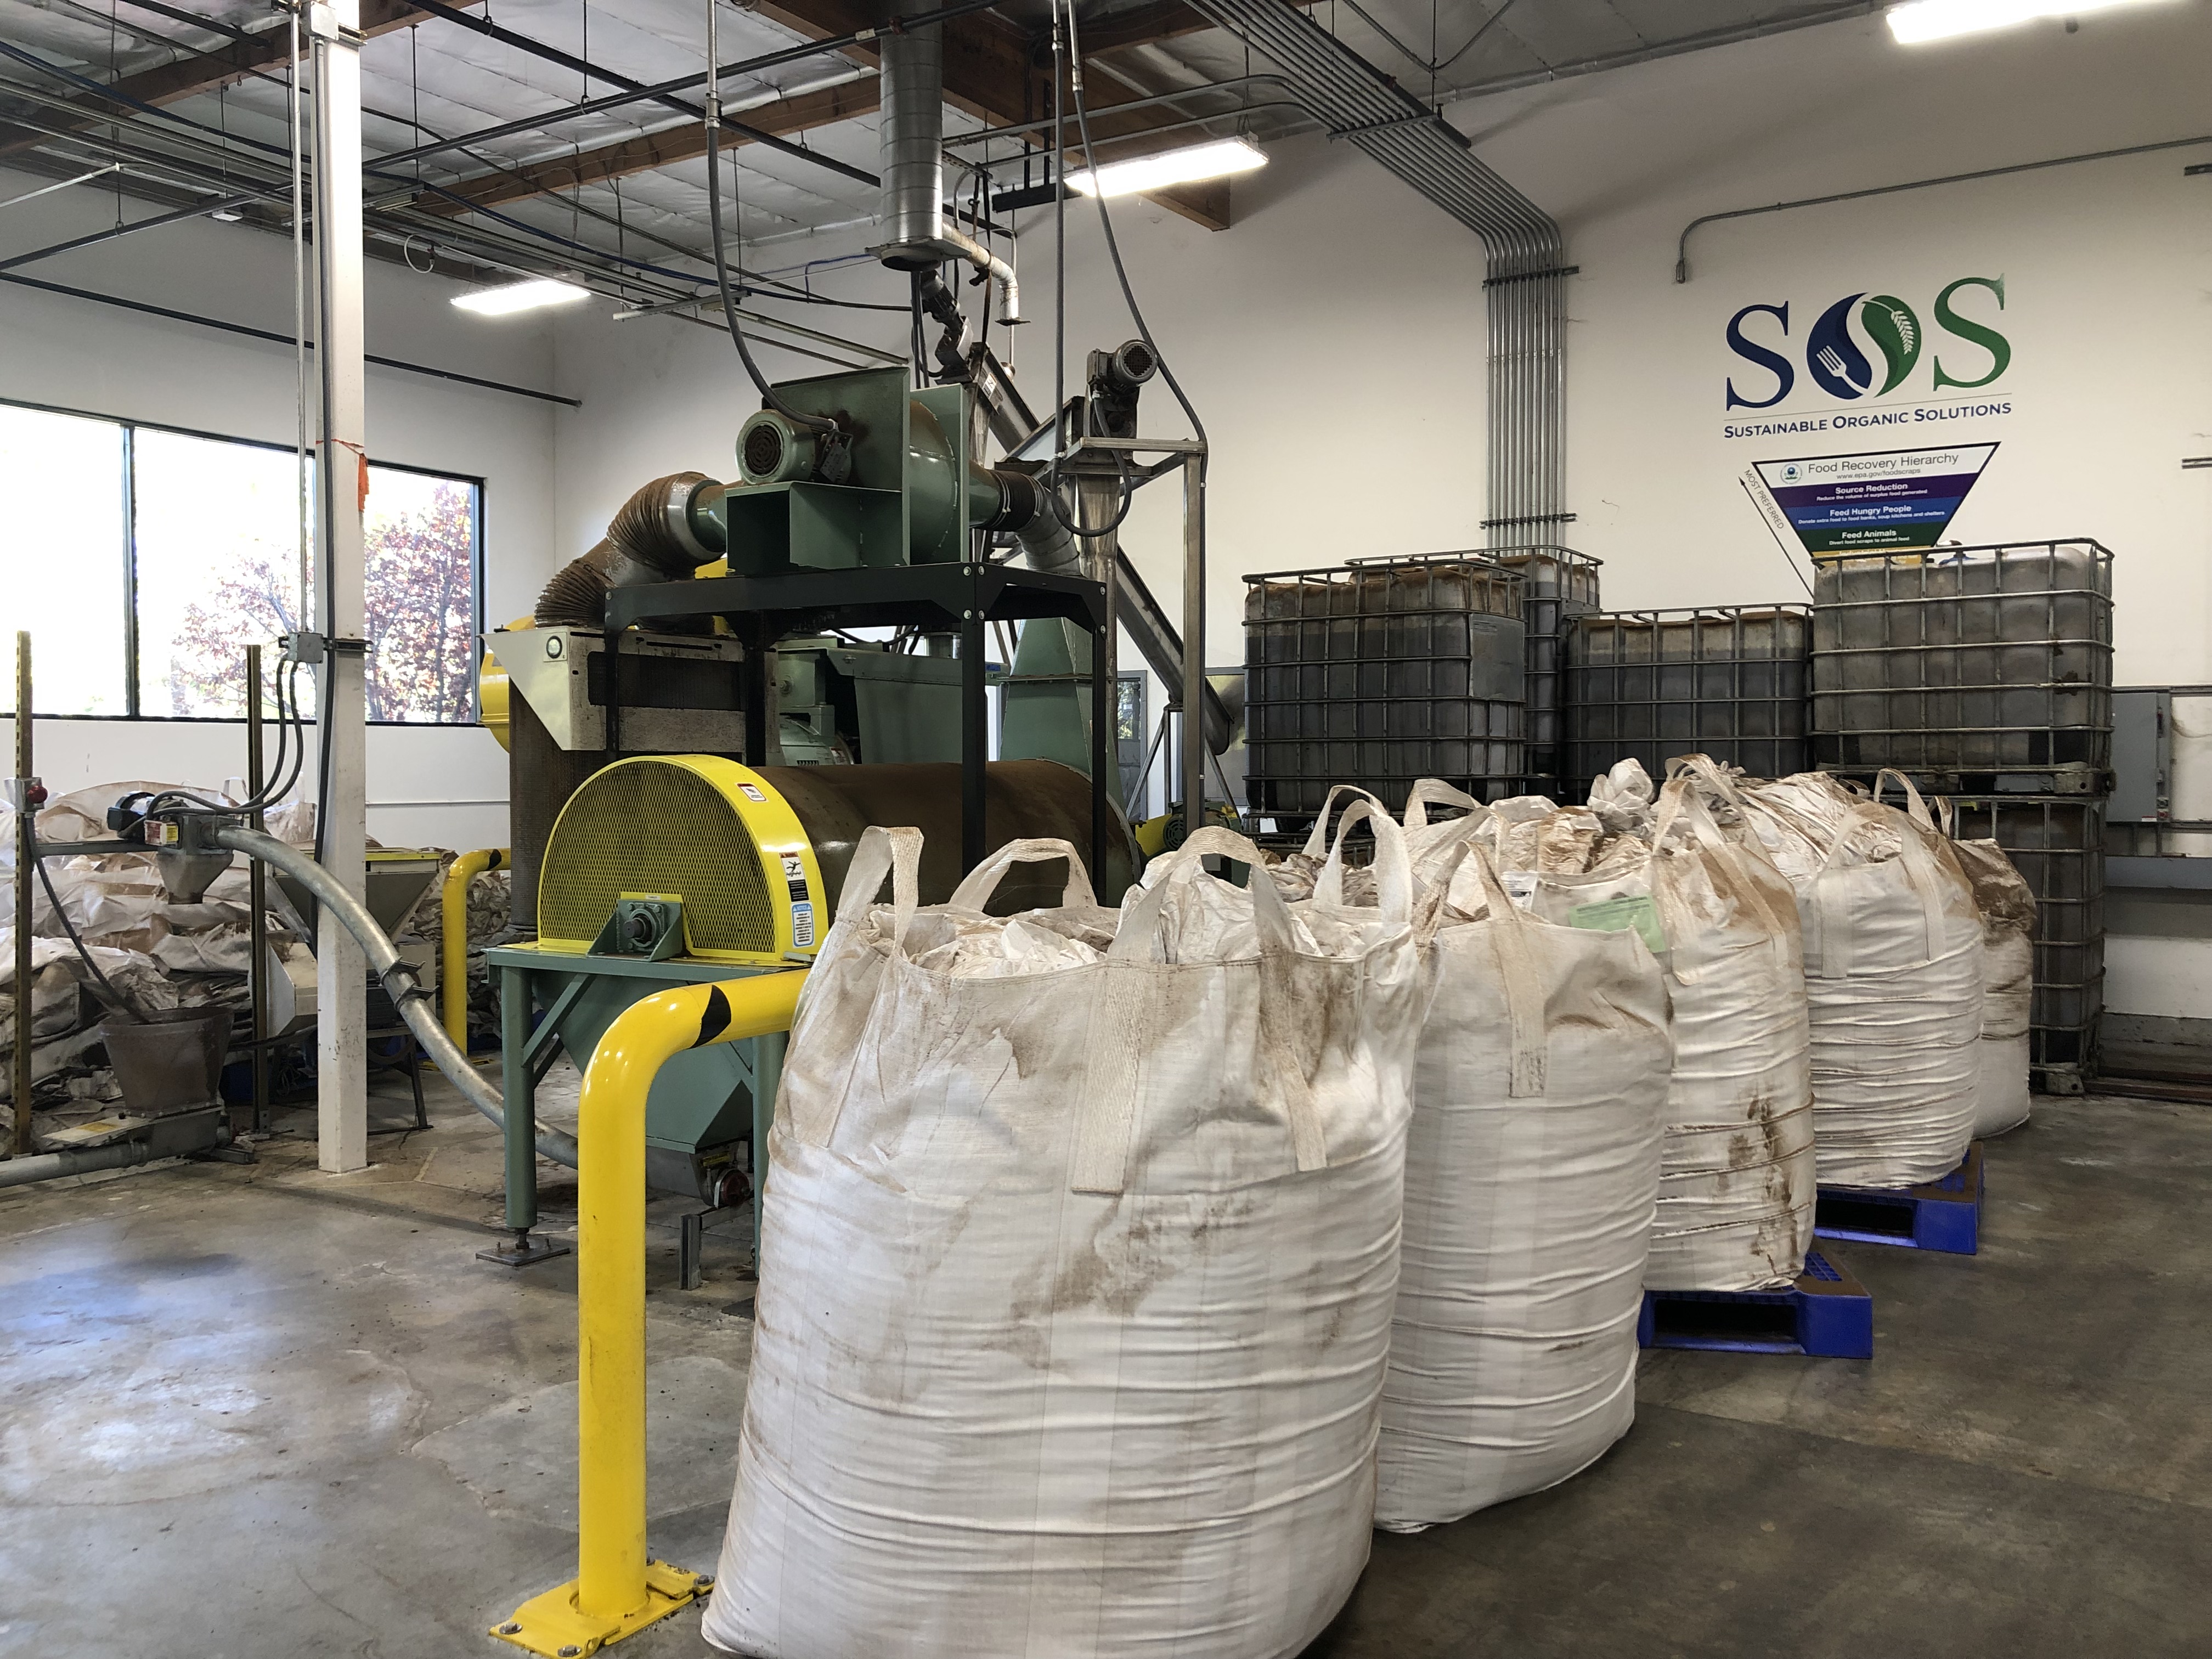 Sustainable Organic Solutions Offers Safe Method of Food Scrap Recycling -  The Silicon Valley Voice